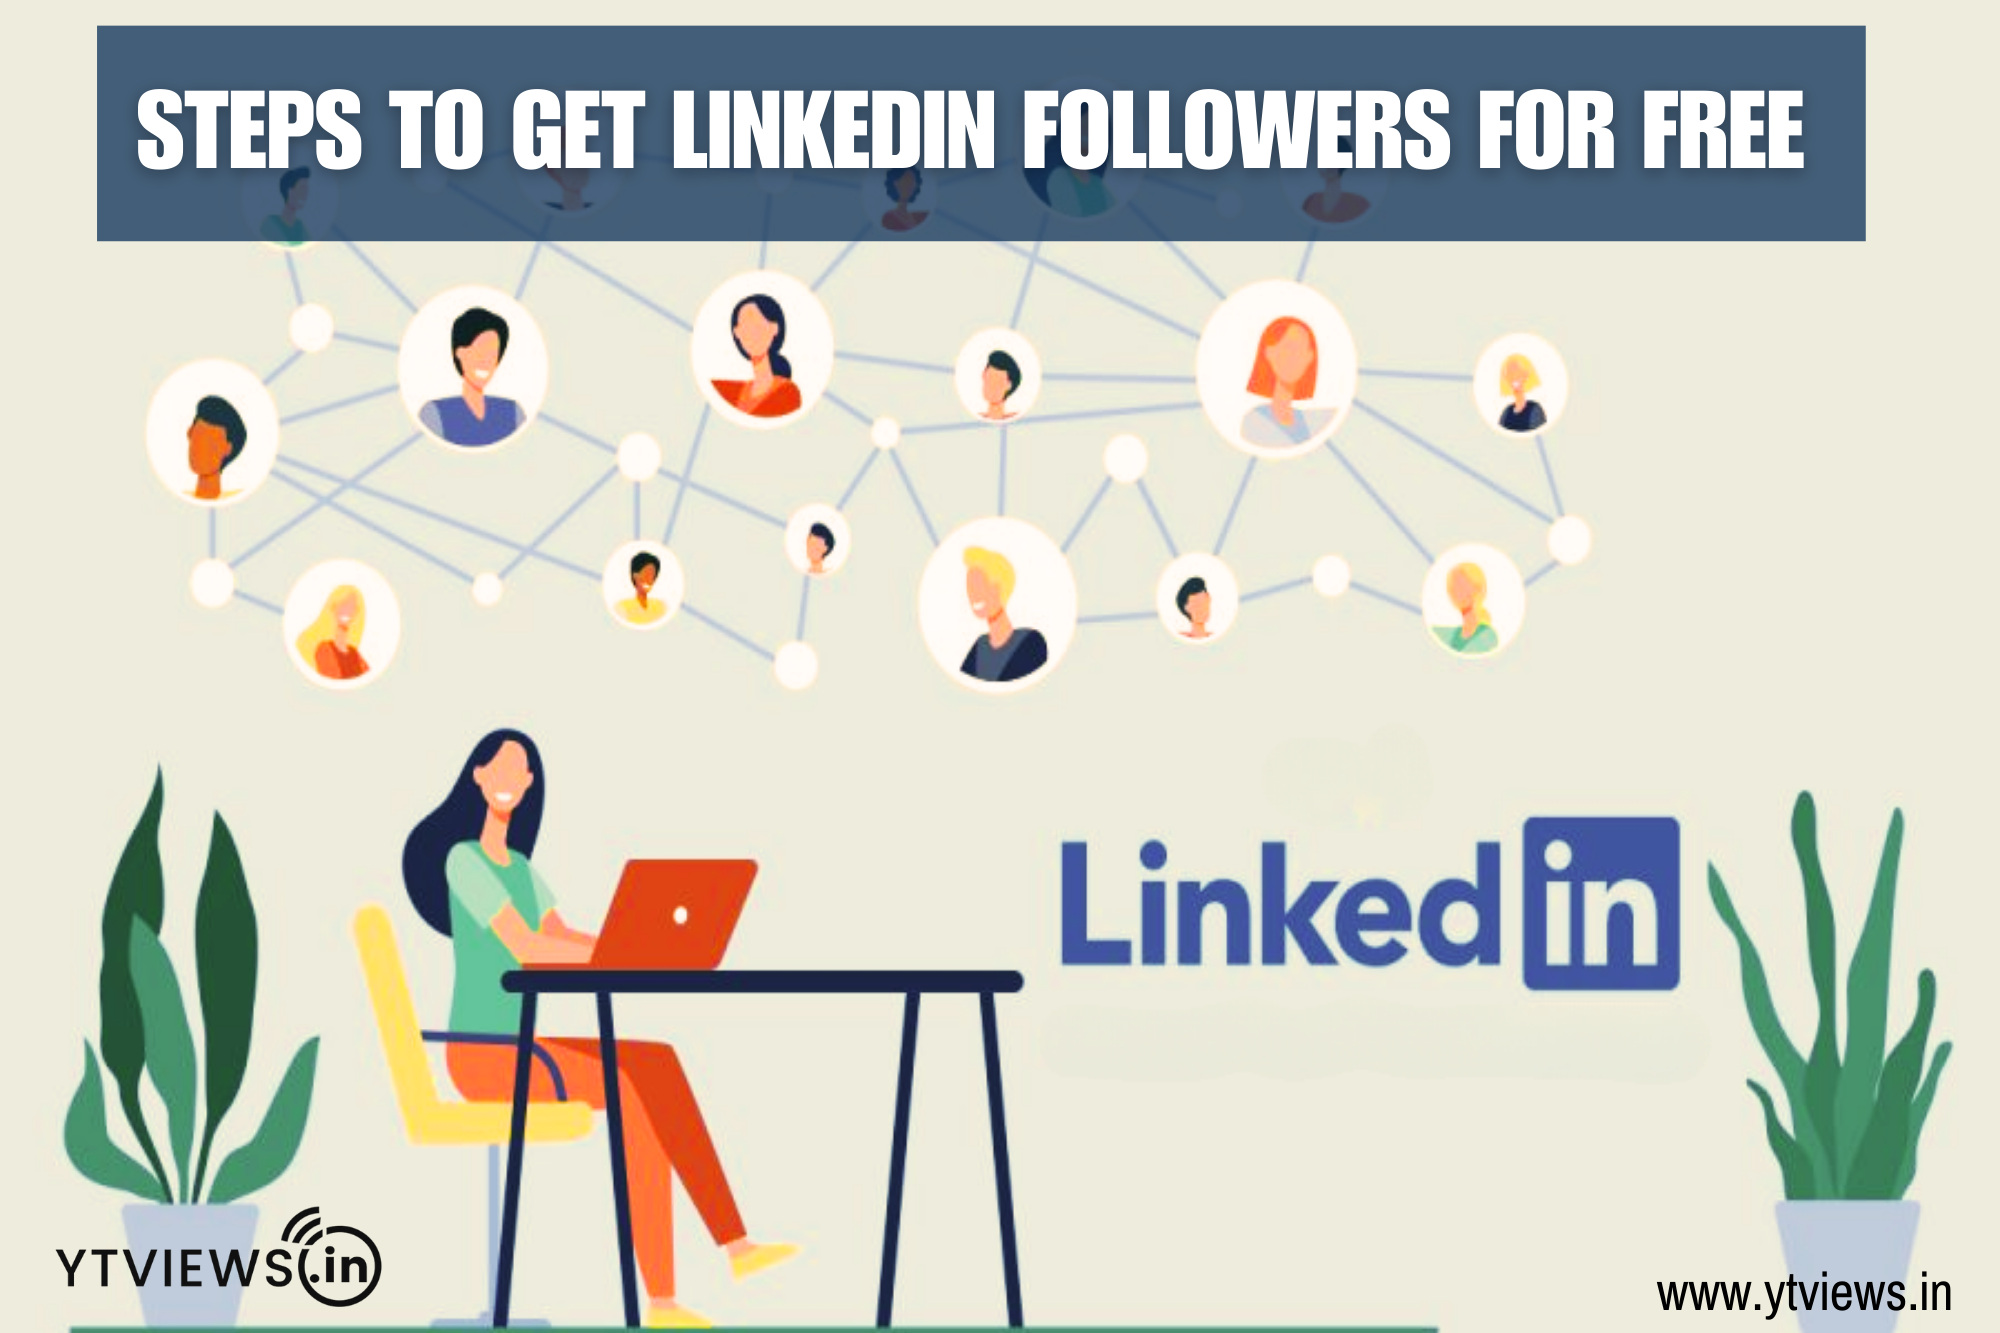 Steps to get LinkedIn followers for free